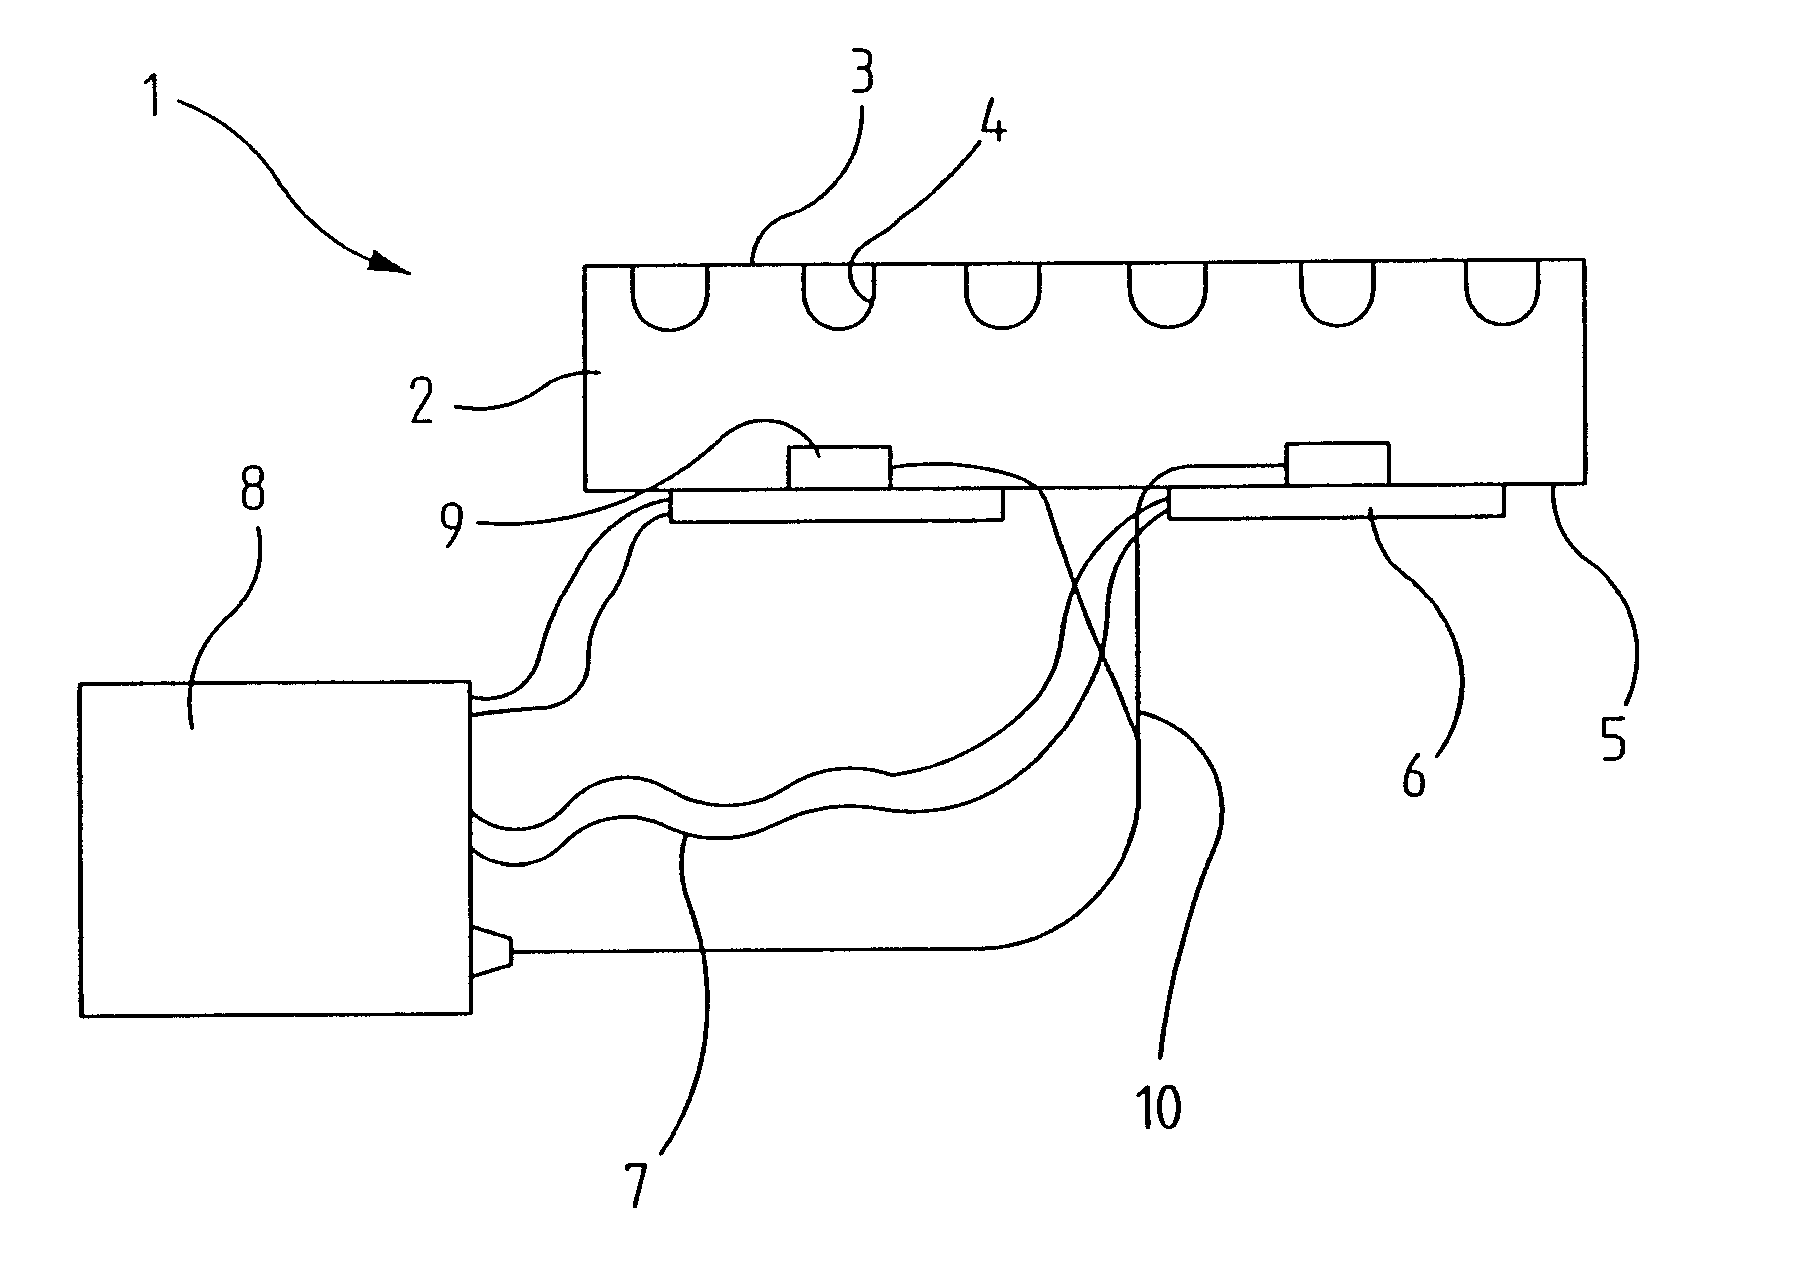 Thermostat apparatus including calibration device